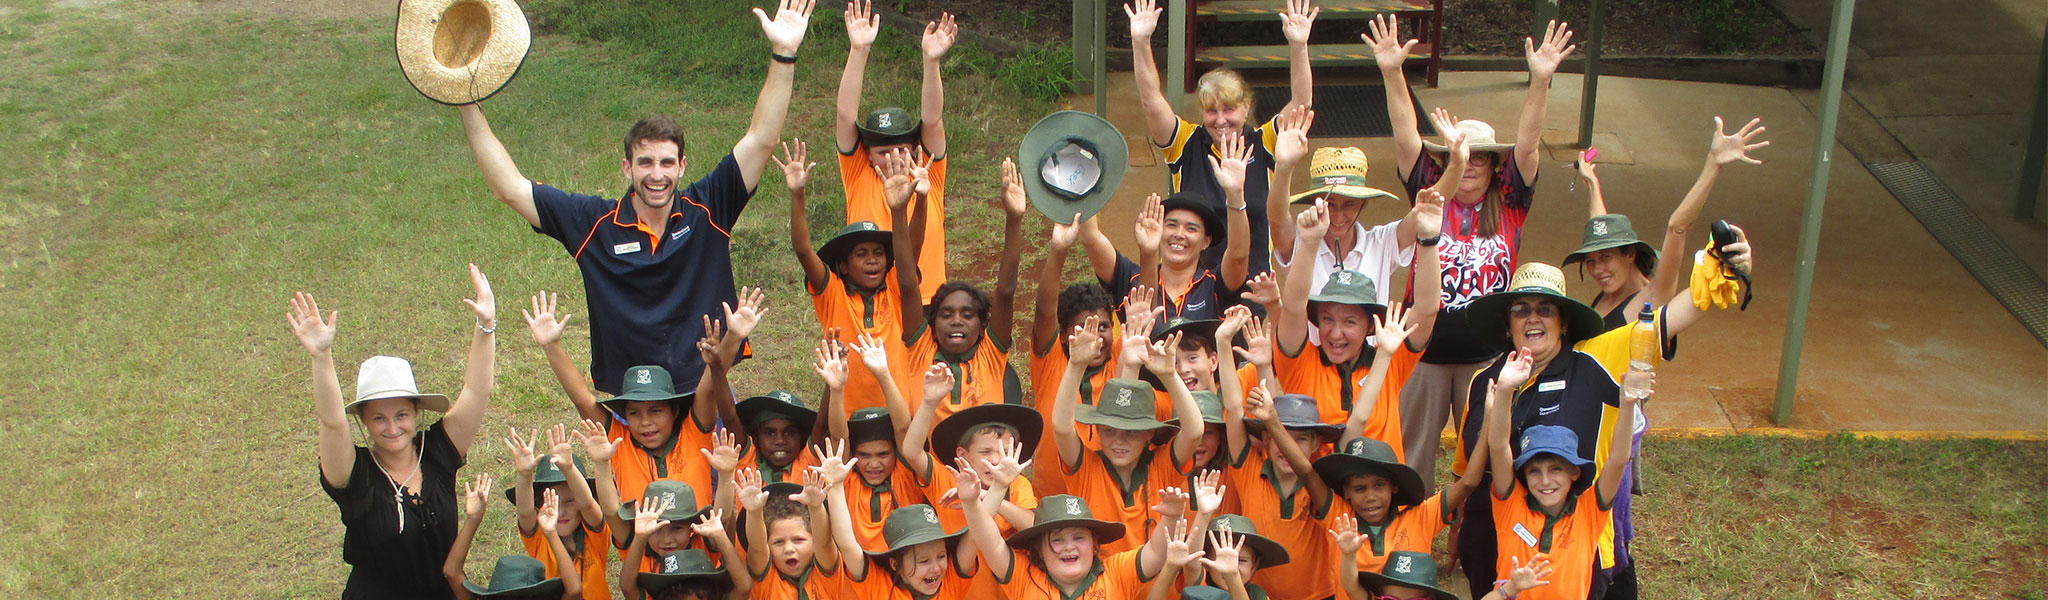 Mount Garnet State School students standing in a group with their arms in the air